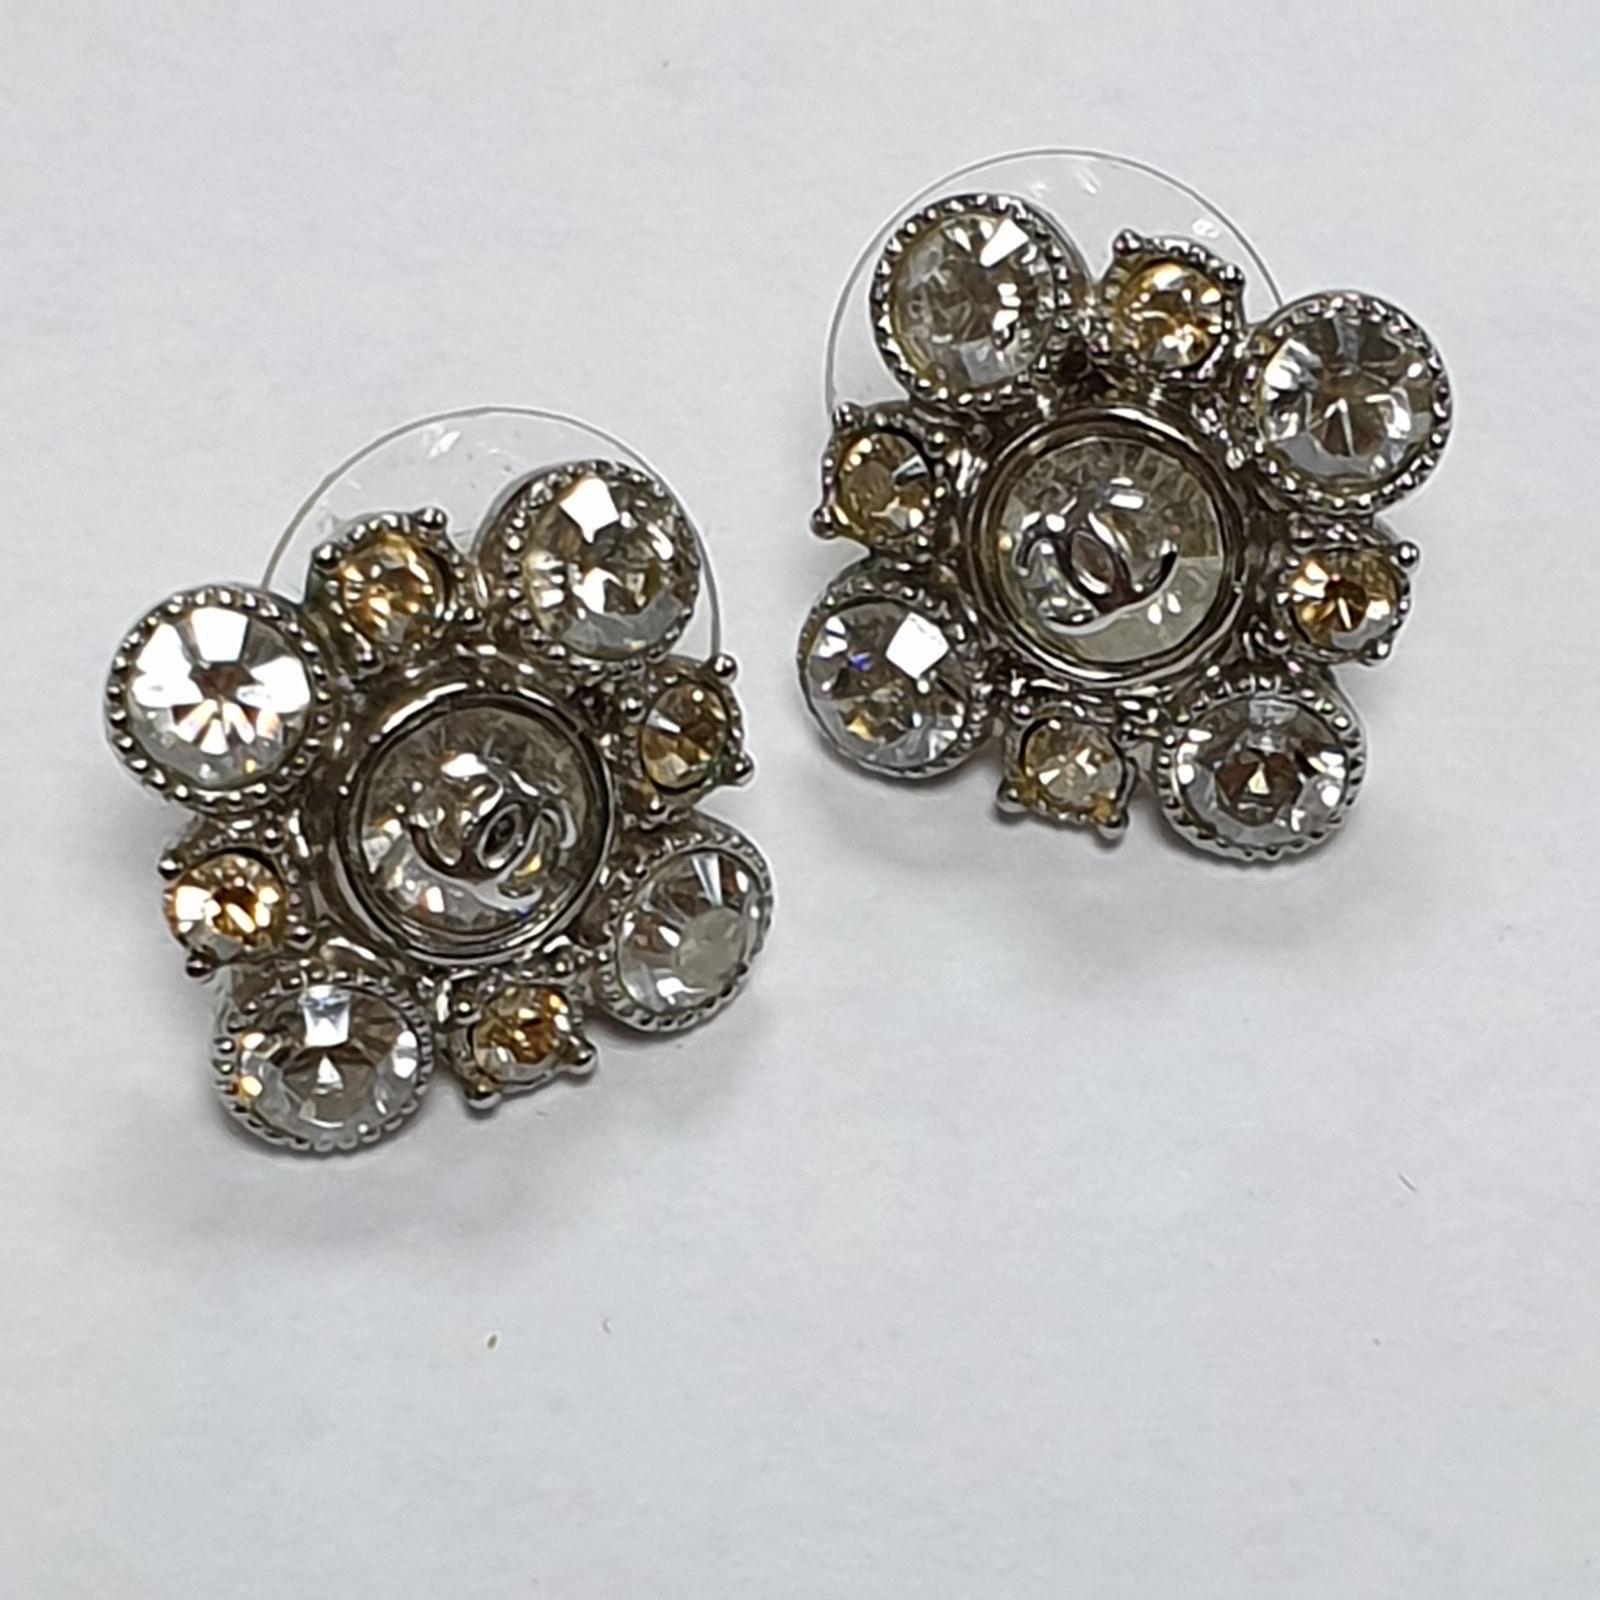 CHANEL Cluster Argyle Champagne Diamond Square Pierced Earrings
Size: 0.6 inches approximately (1,4 cm)
Color: Silver, Champagne yellow
